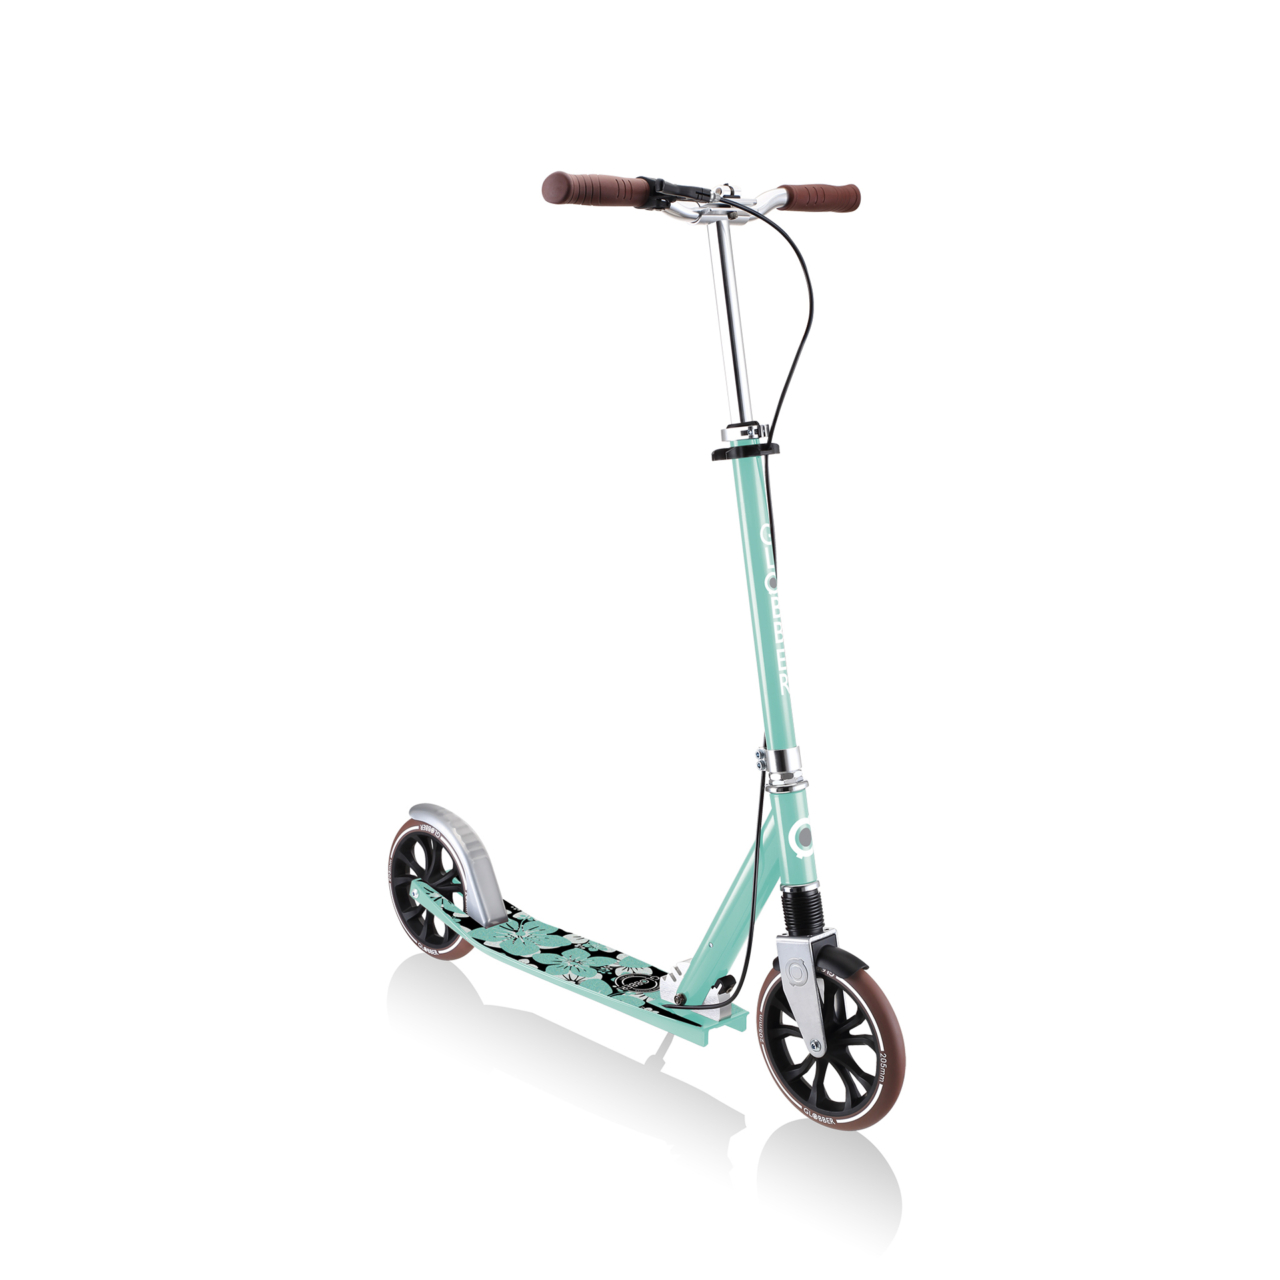 685 206 Big Wheel Scooter For Kids And Teens